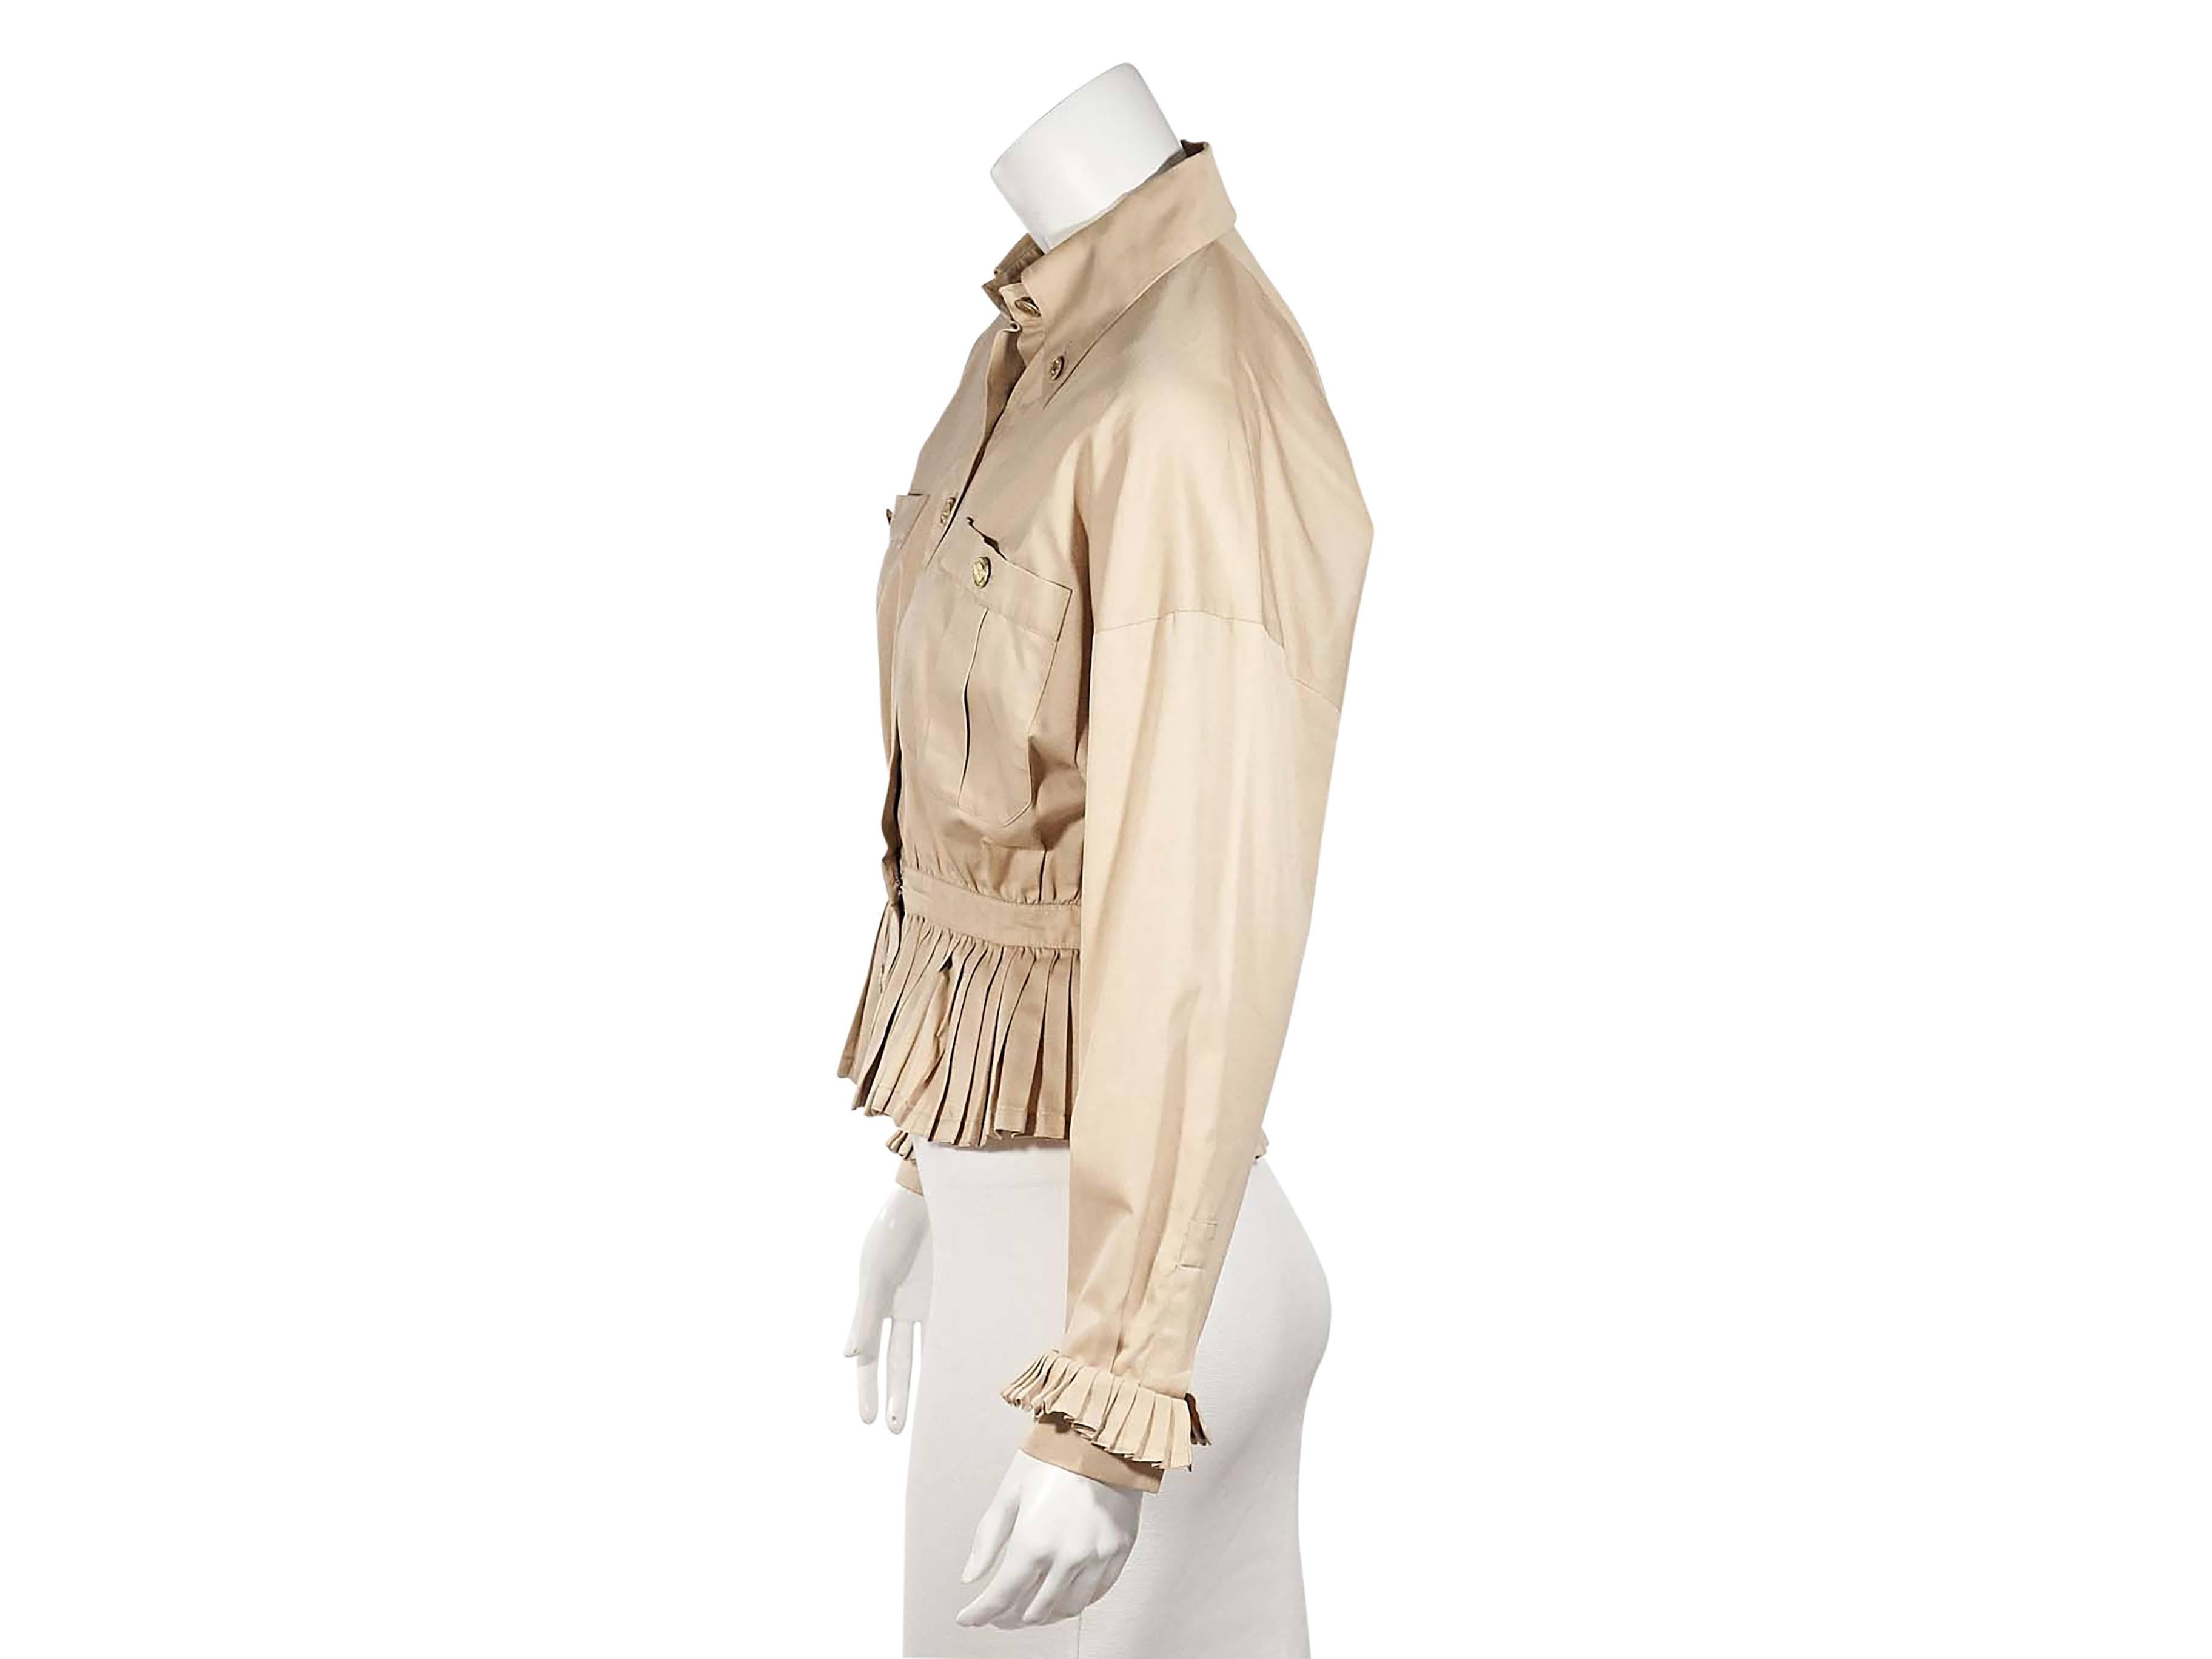 Product details:  Vintage tan peplum jacket by Chanel.  Button-down point collar.  Long dolman sleeves.  Ruffled detail at cuffs.  Button-front closure.  Chest button patch pockets.  Pleated peplum hem.   
Condition: Excellent. 
Est. Retail $